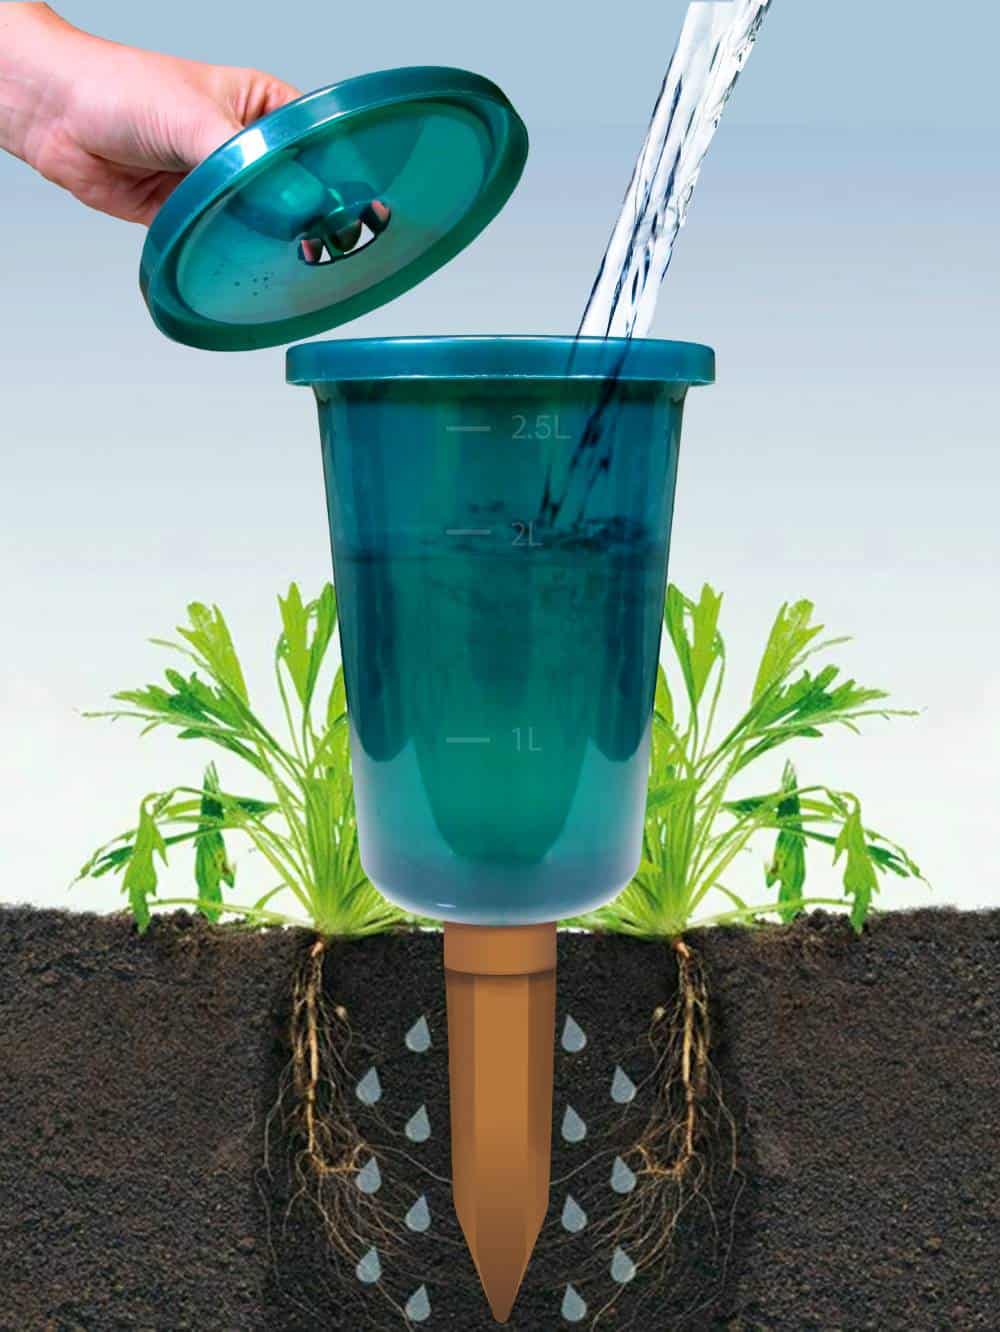 A Hydro Cup Watering Stake delivers water directly to a plant's root zone